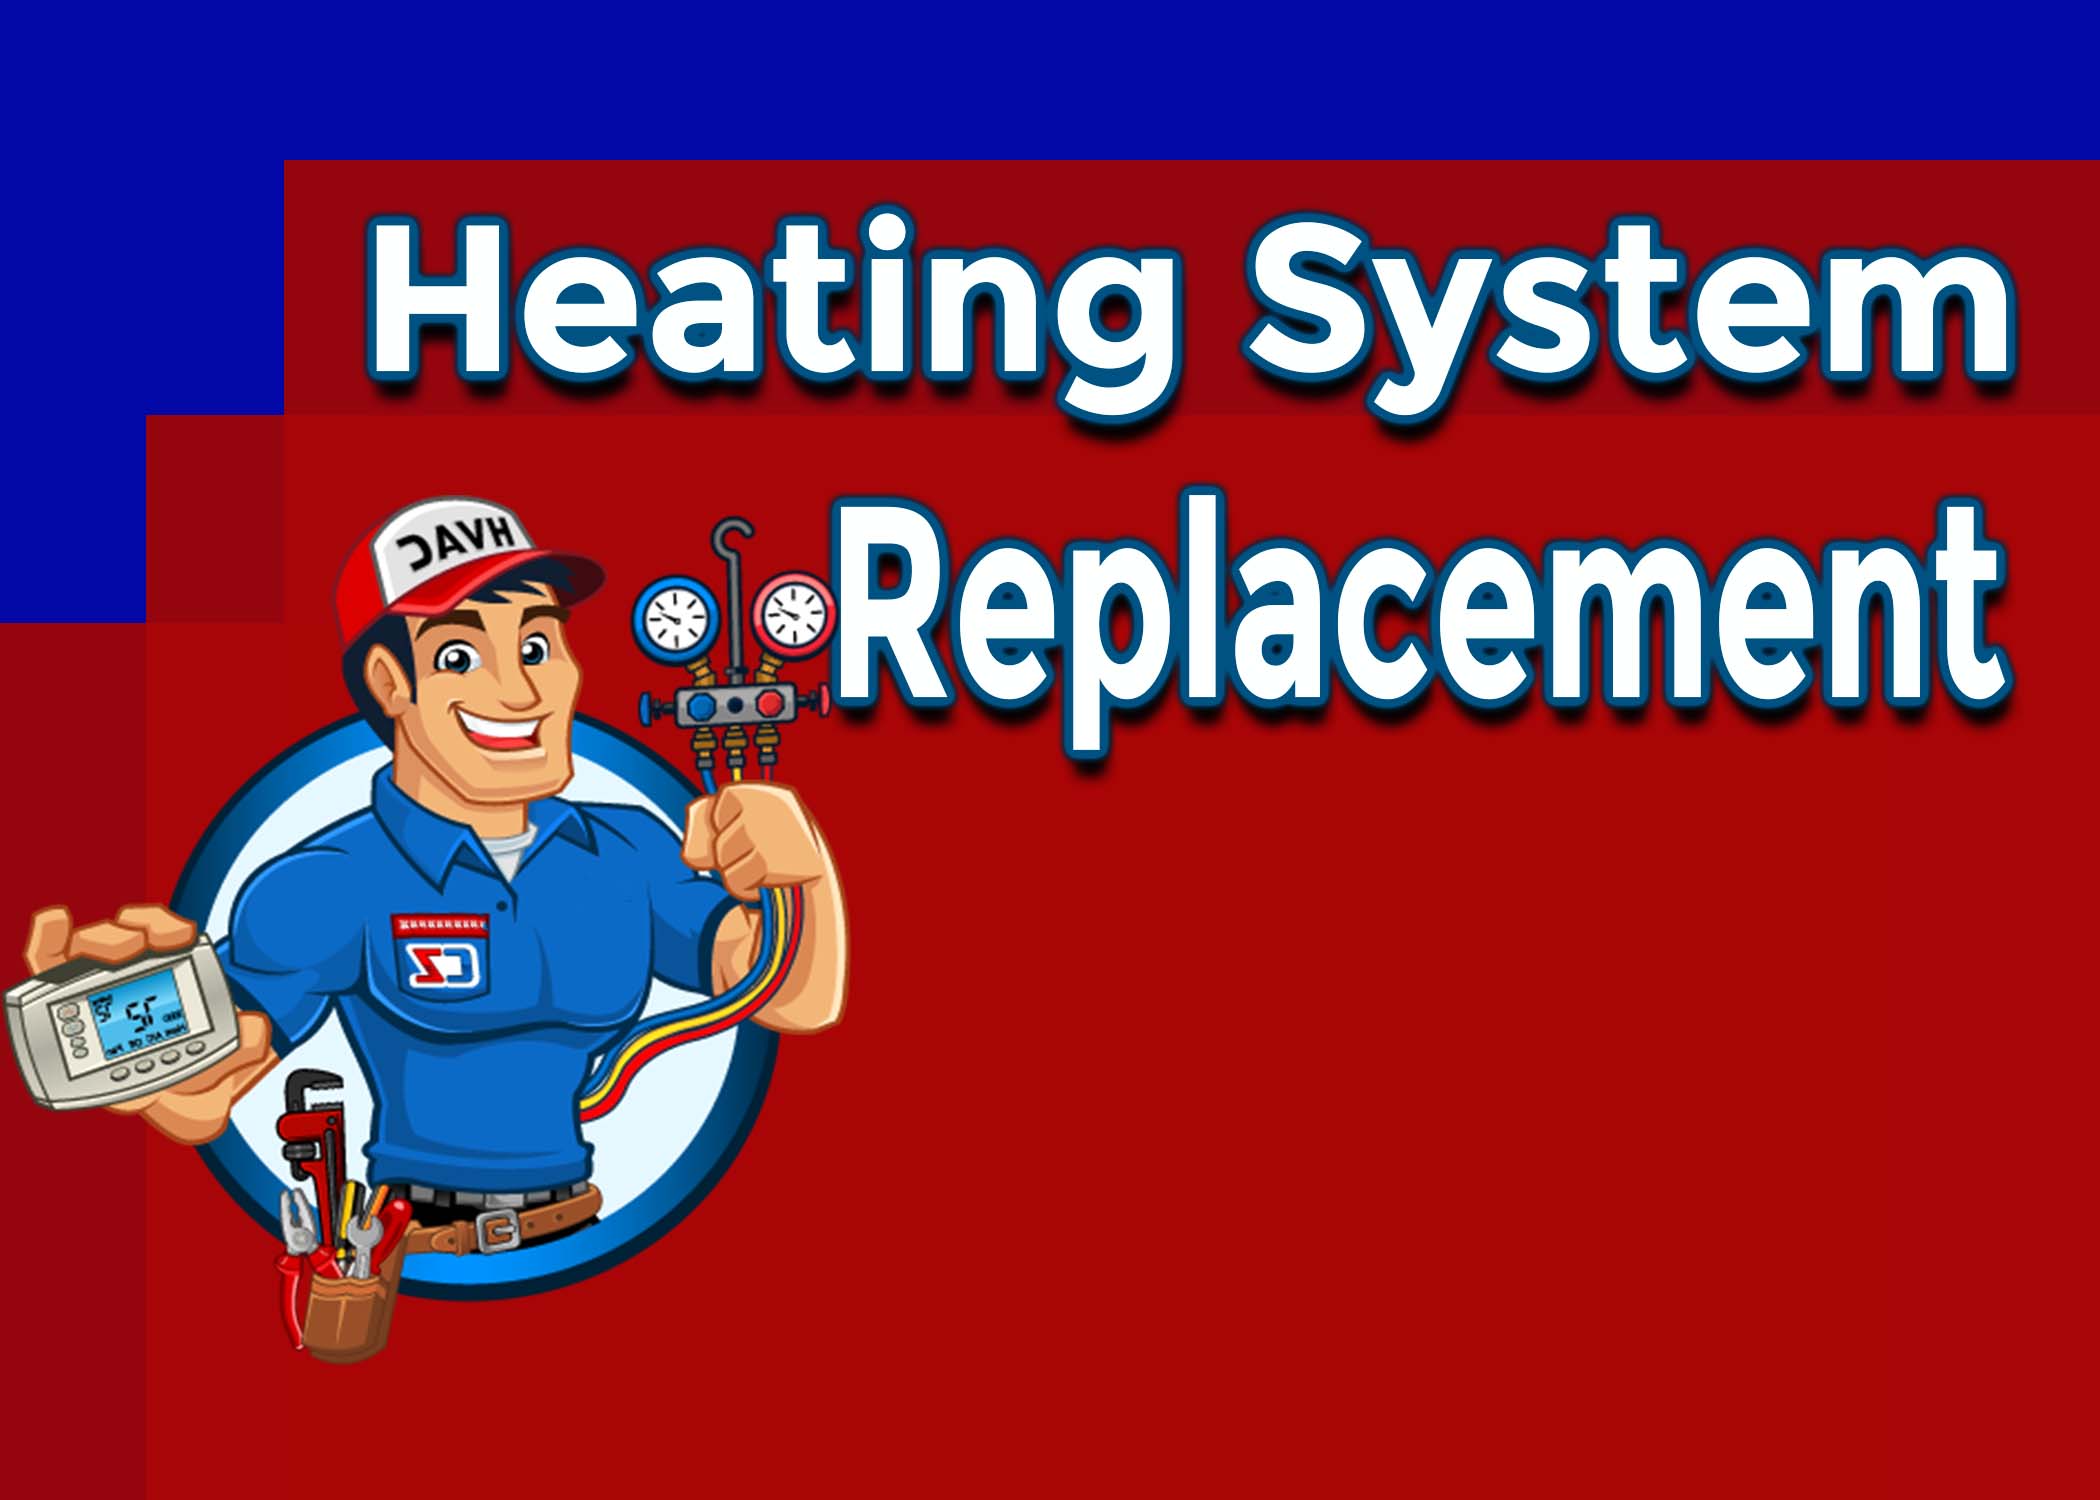 Heating System Replacement